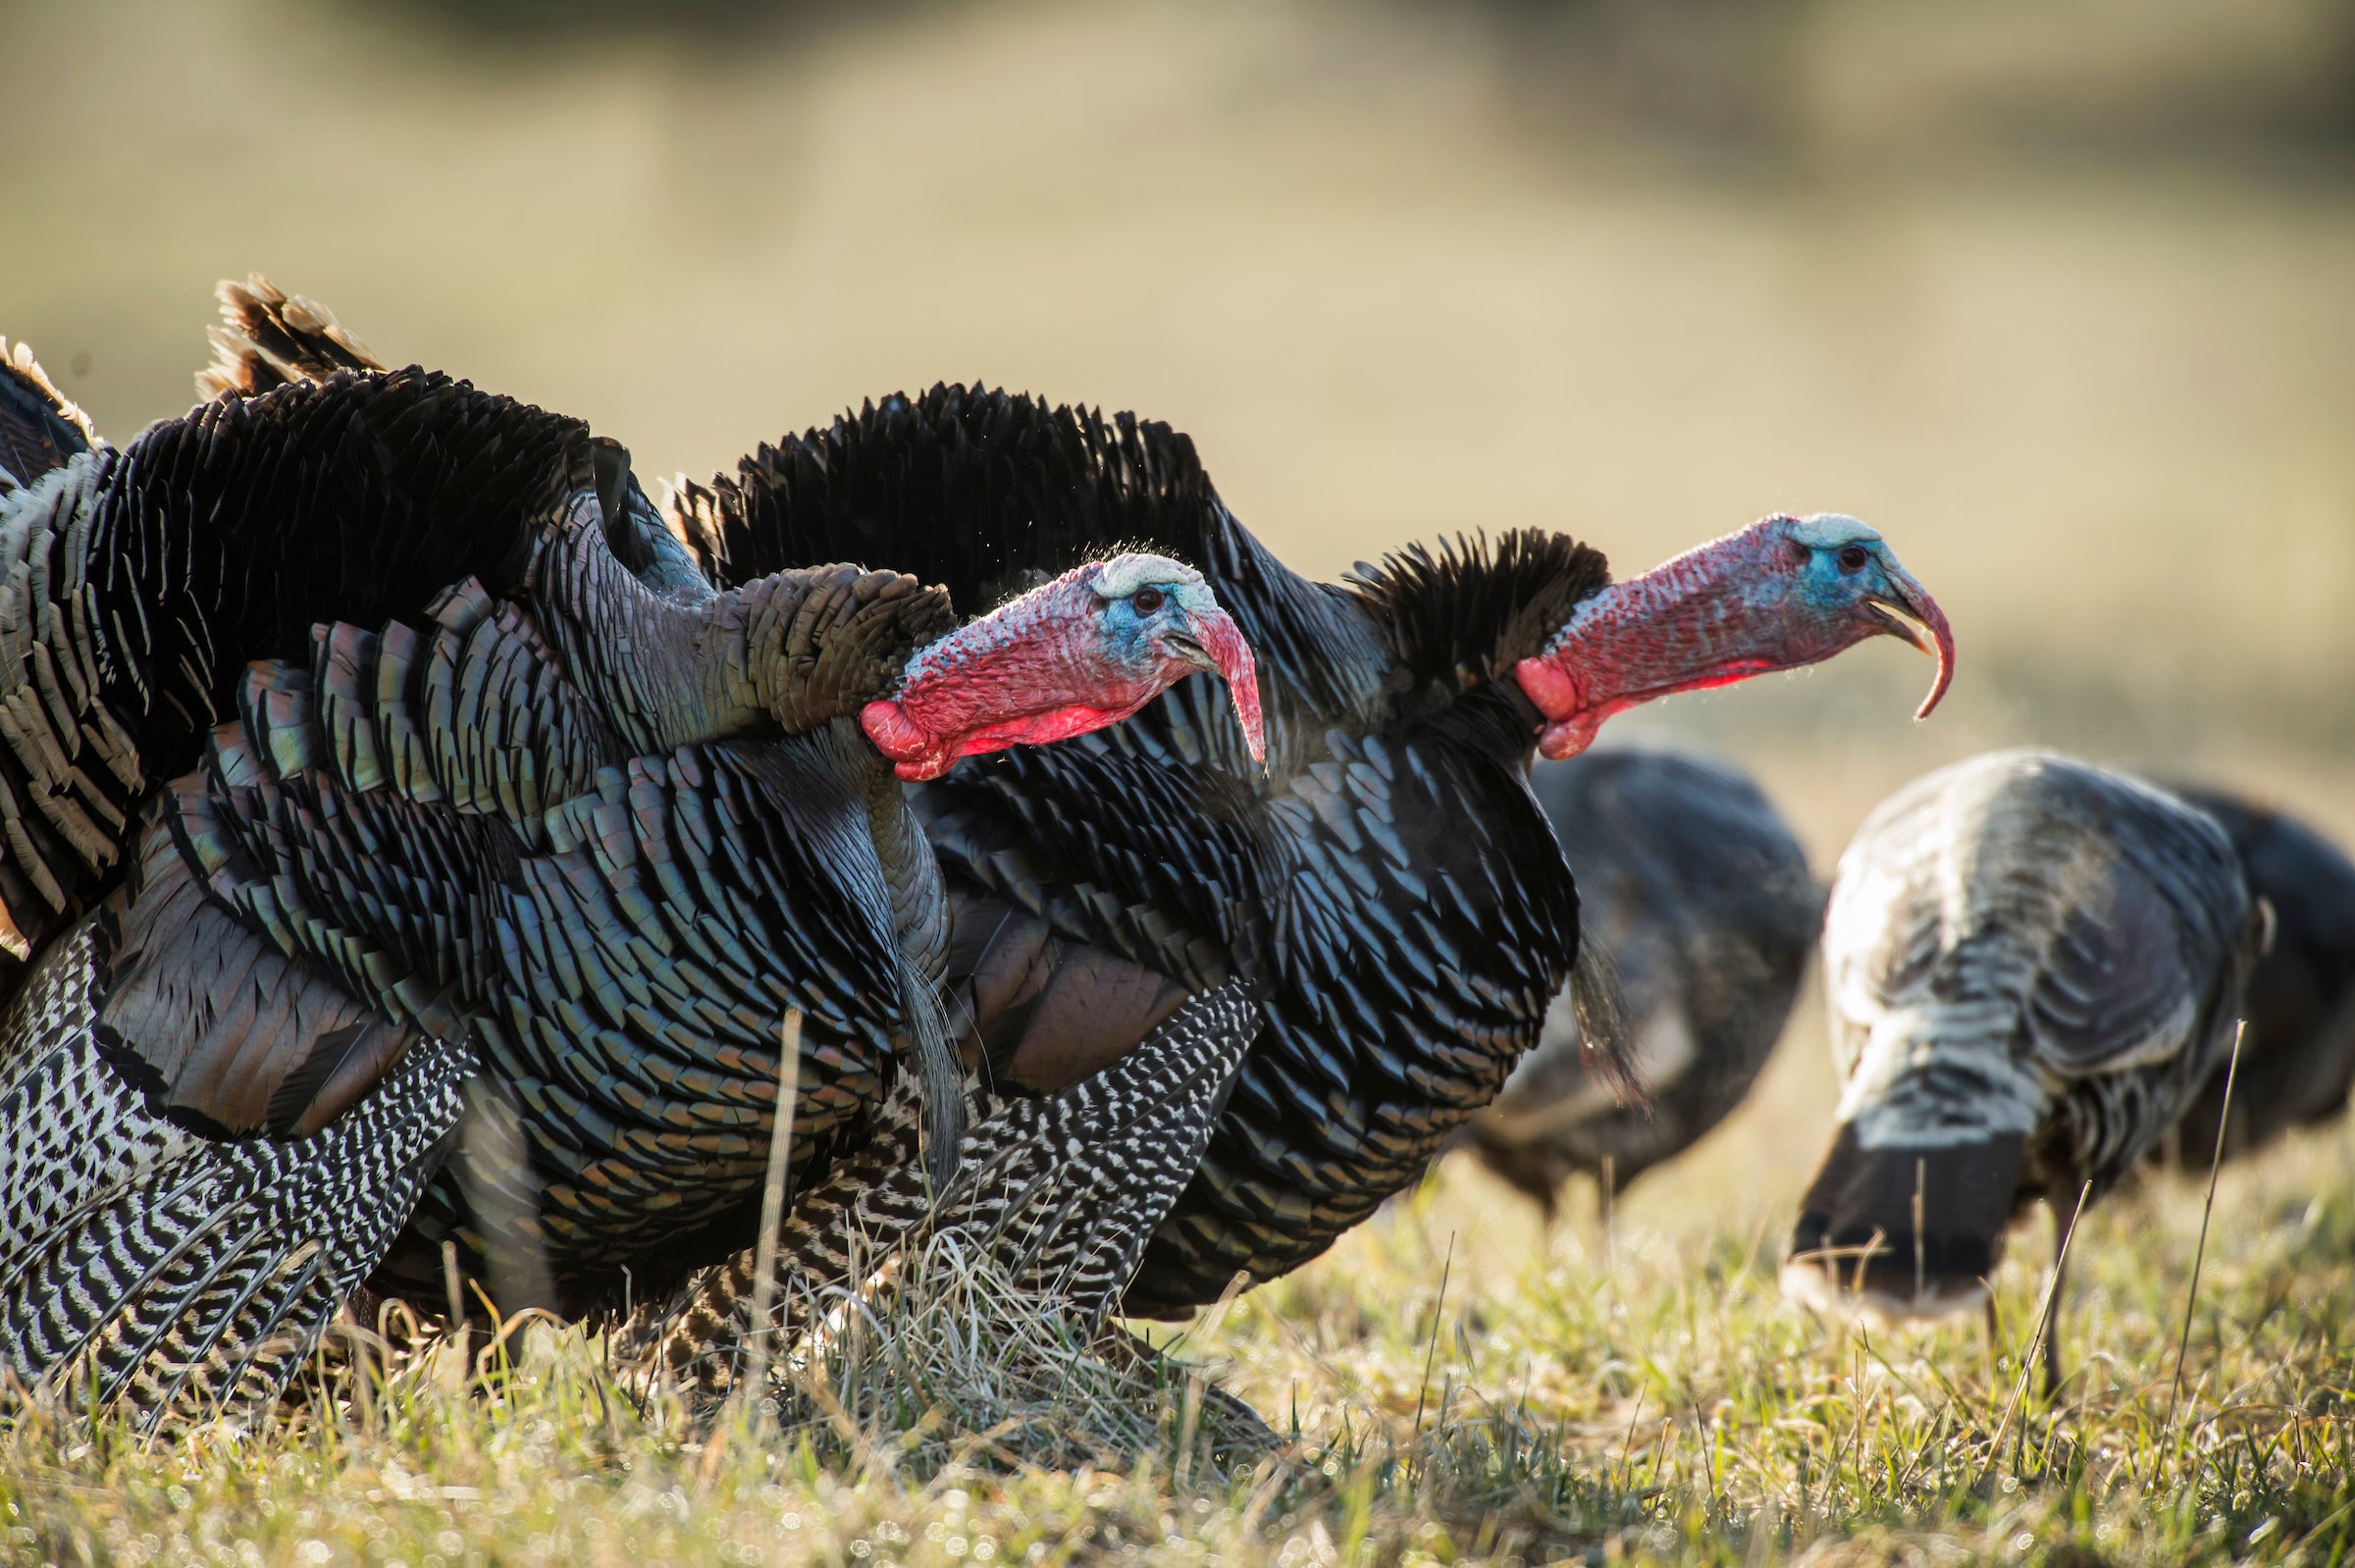 Two tom turkeys strut and gobble amid a flock of birds milling in a field